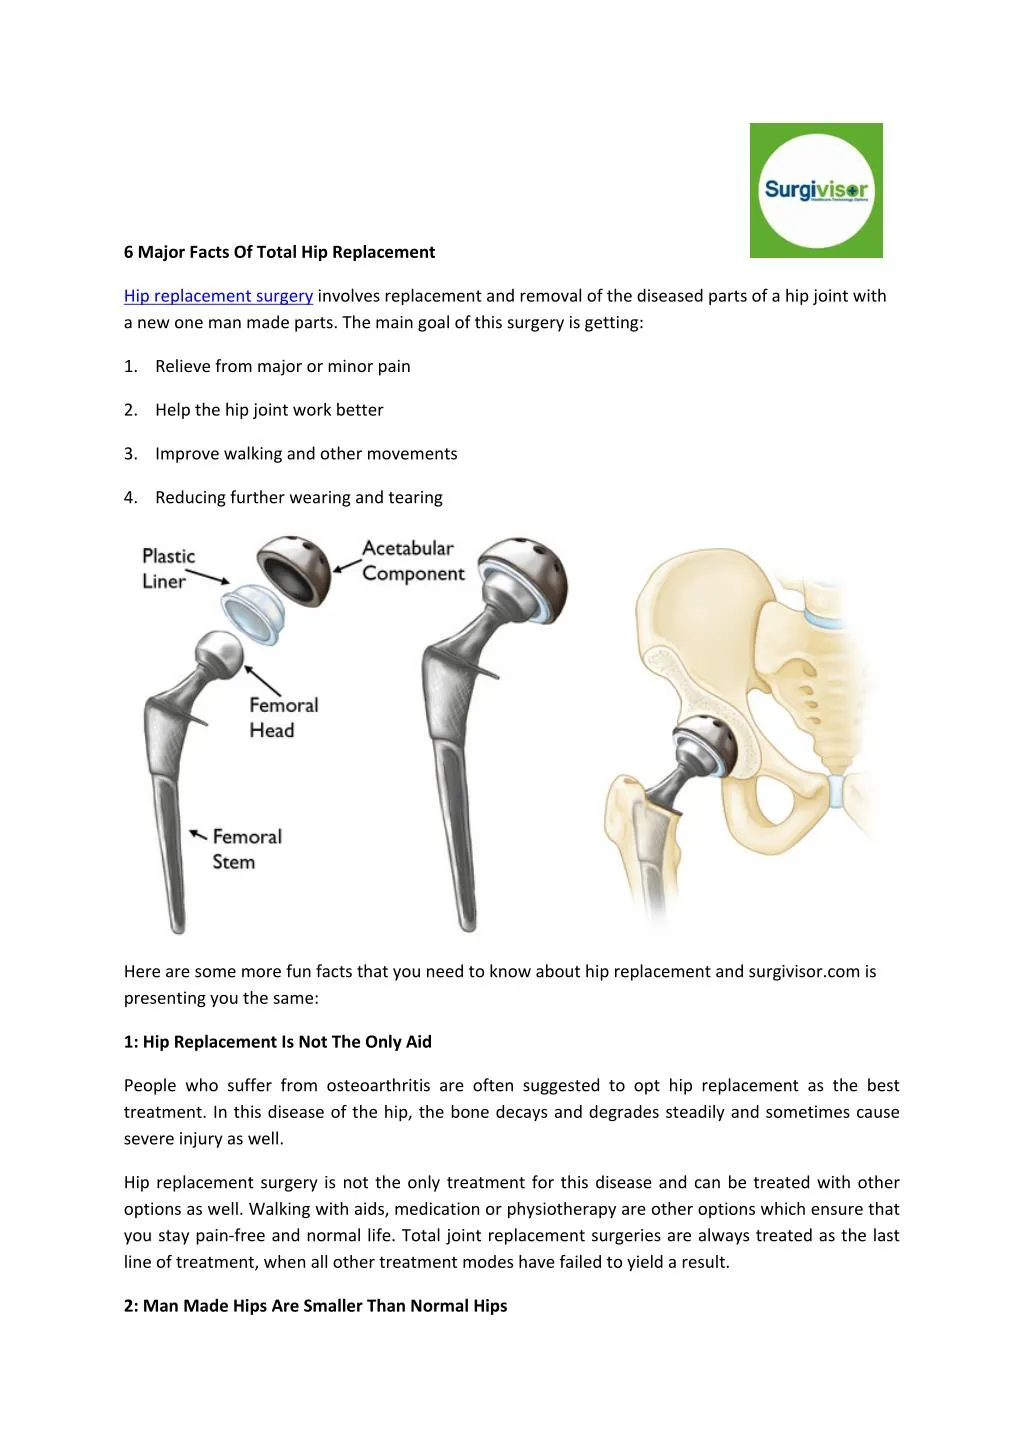 6 major facts of total hip replacement